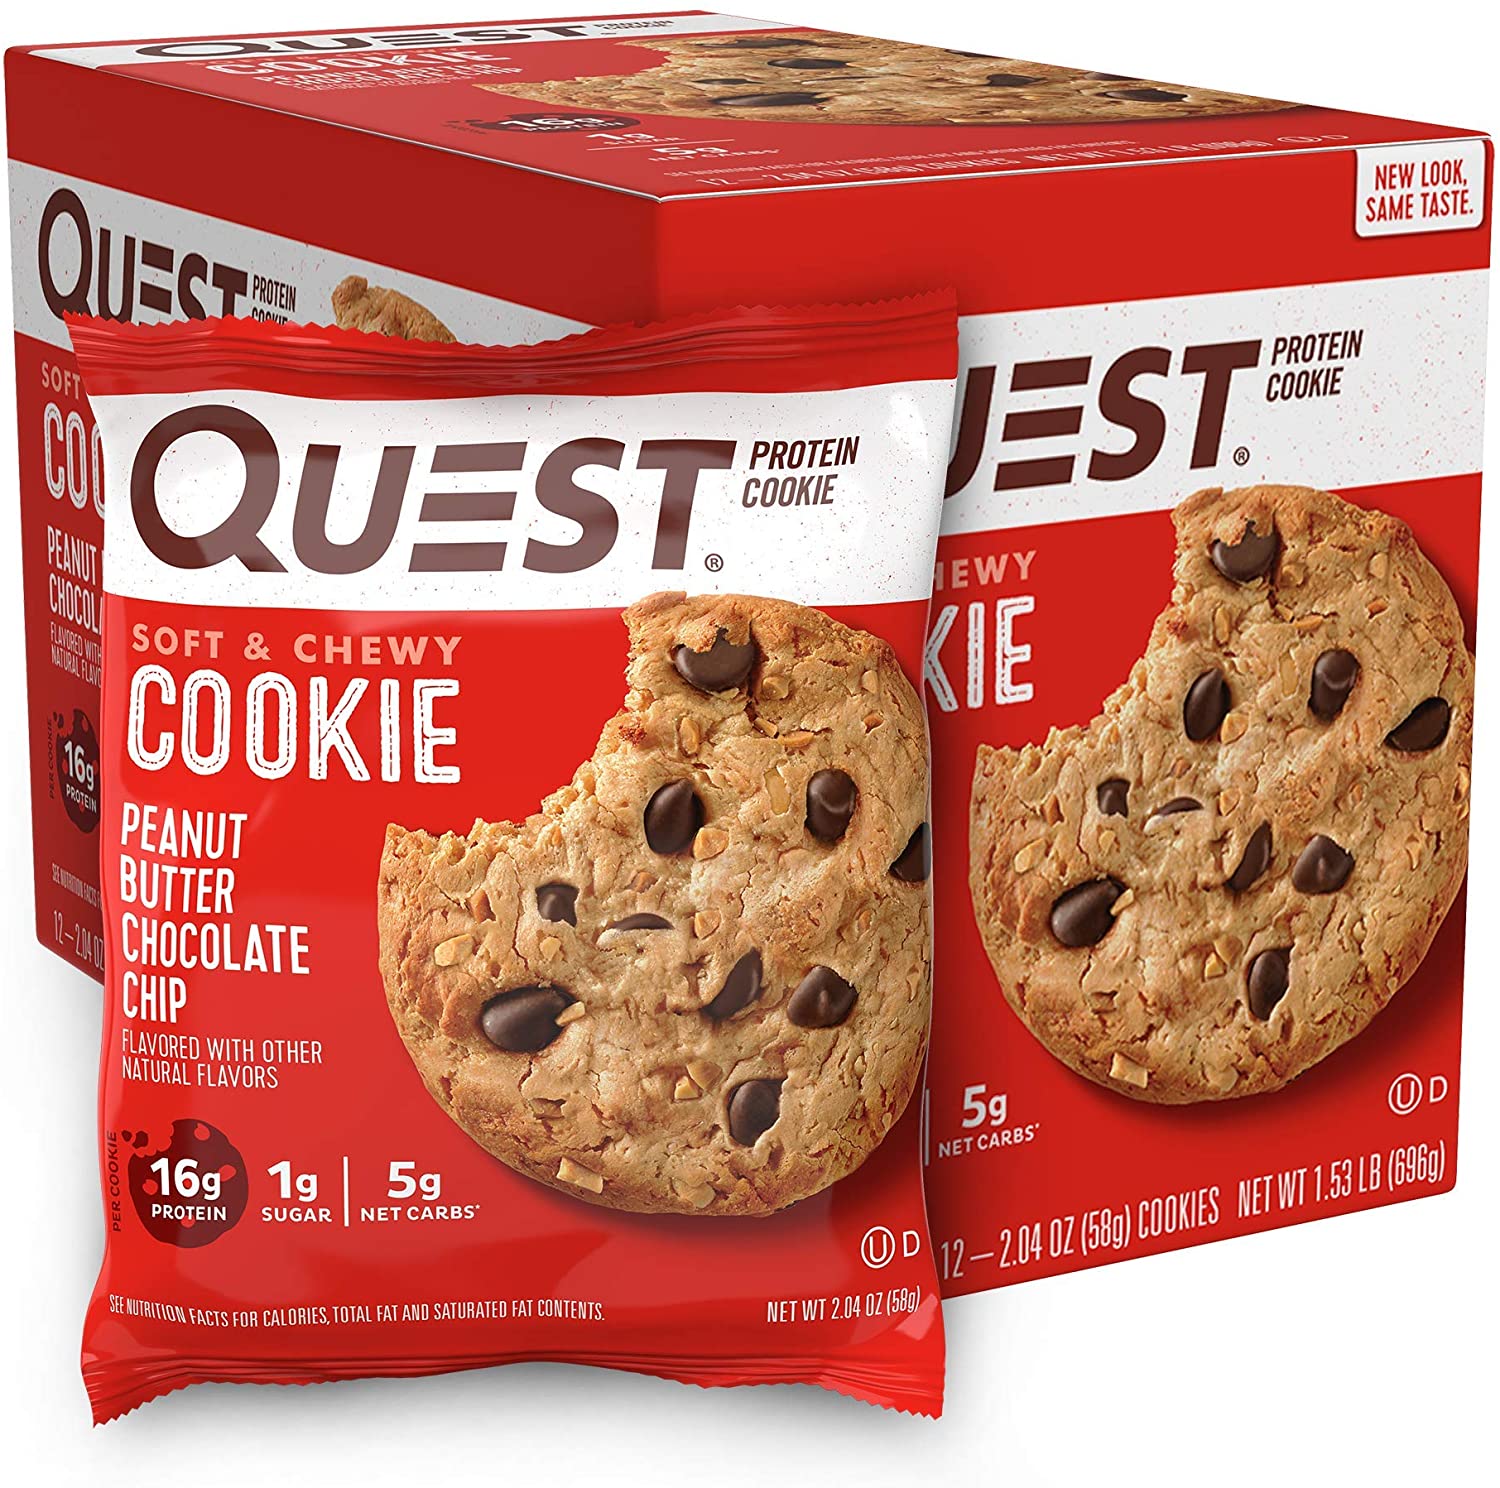 Quest Nutrition - Protein Cookie Soft&Chewy - Box 12